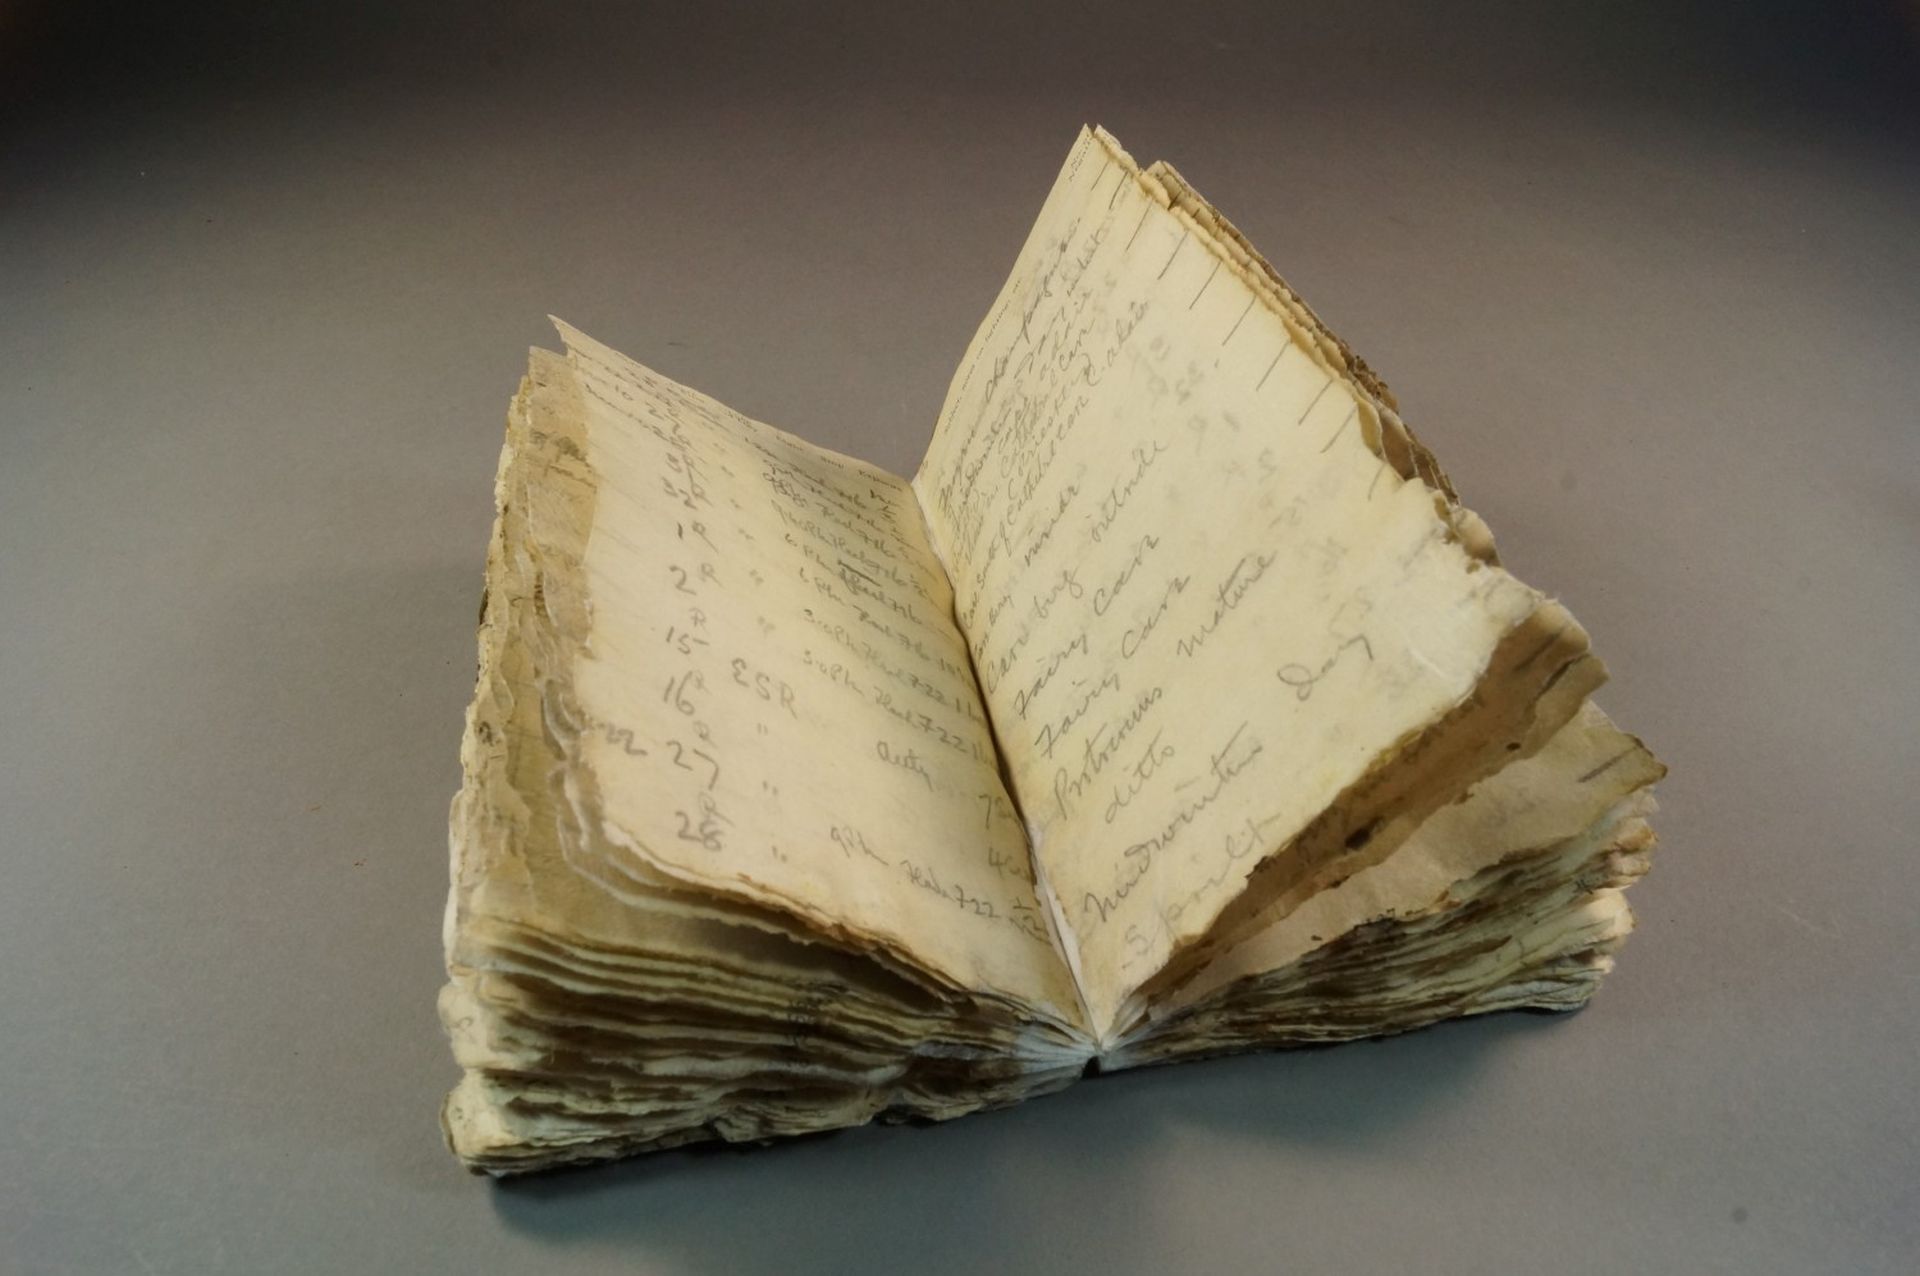 Levick's notebook after restoration by the Trust